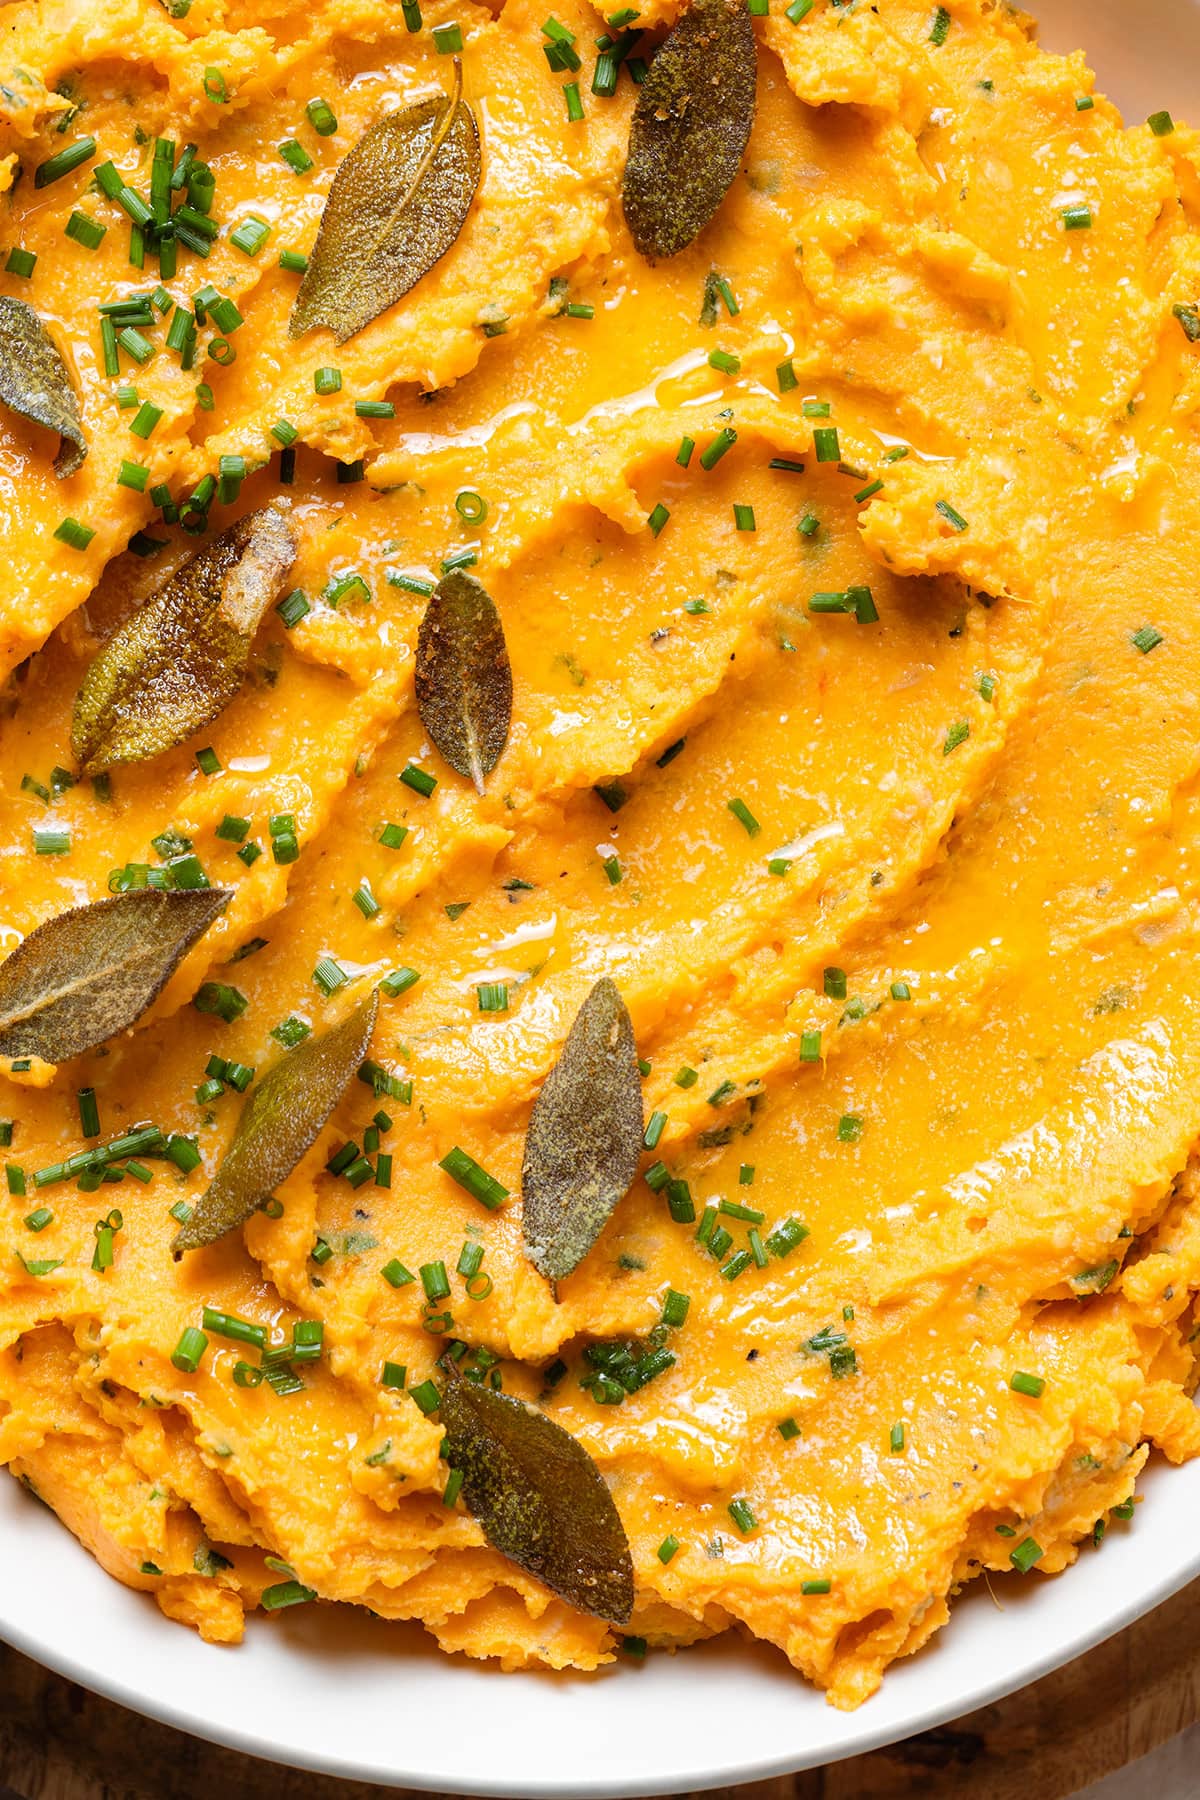 Mashed sweet potatoes in a white bowl topped with fried sage leaves and chives.